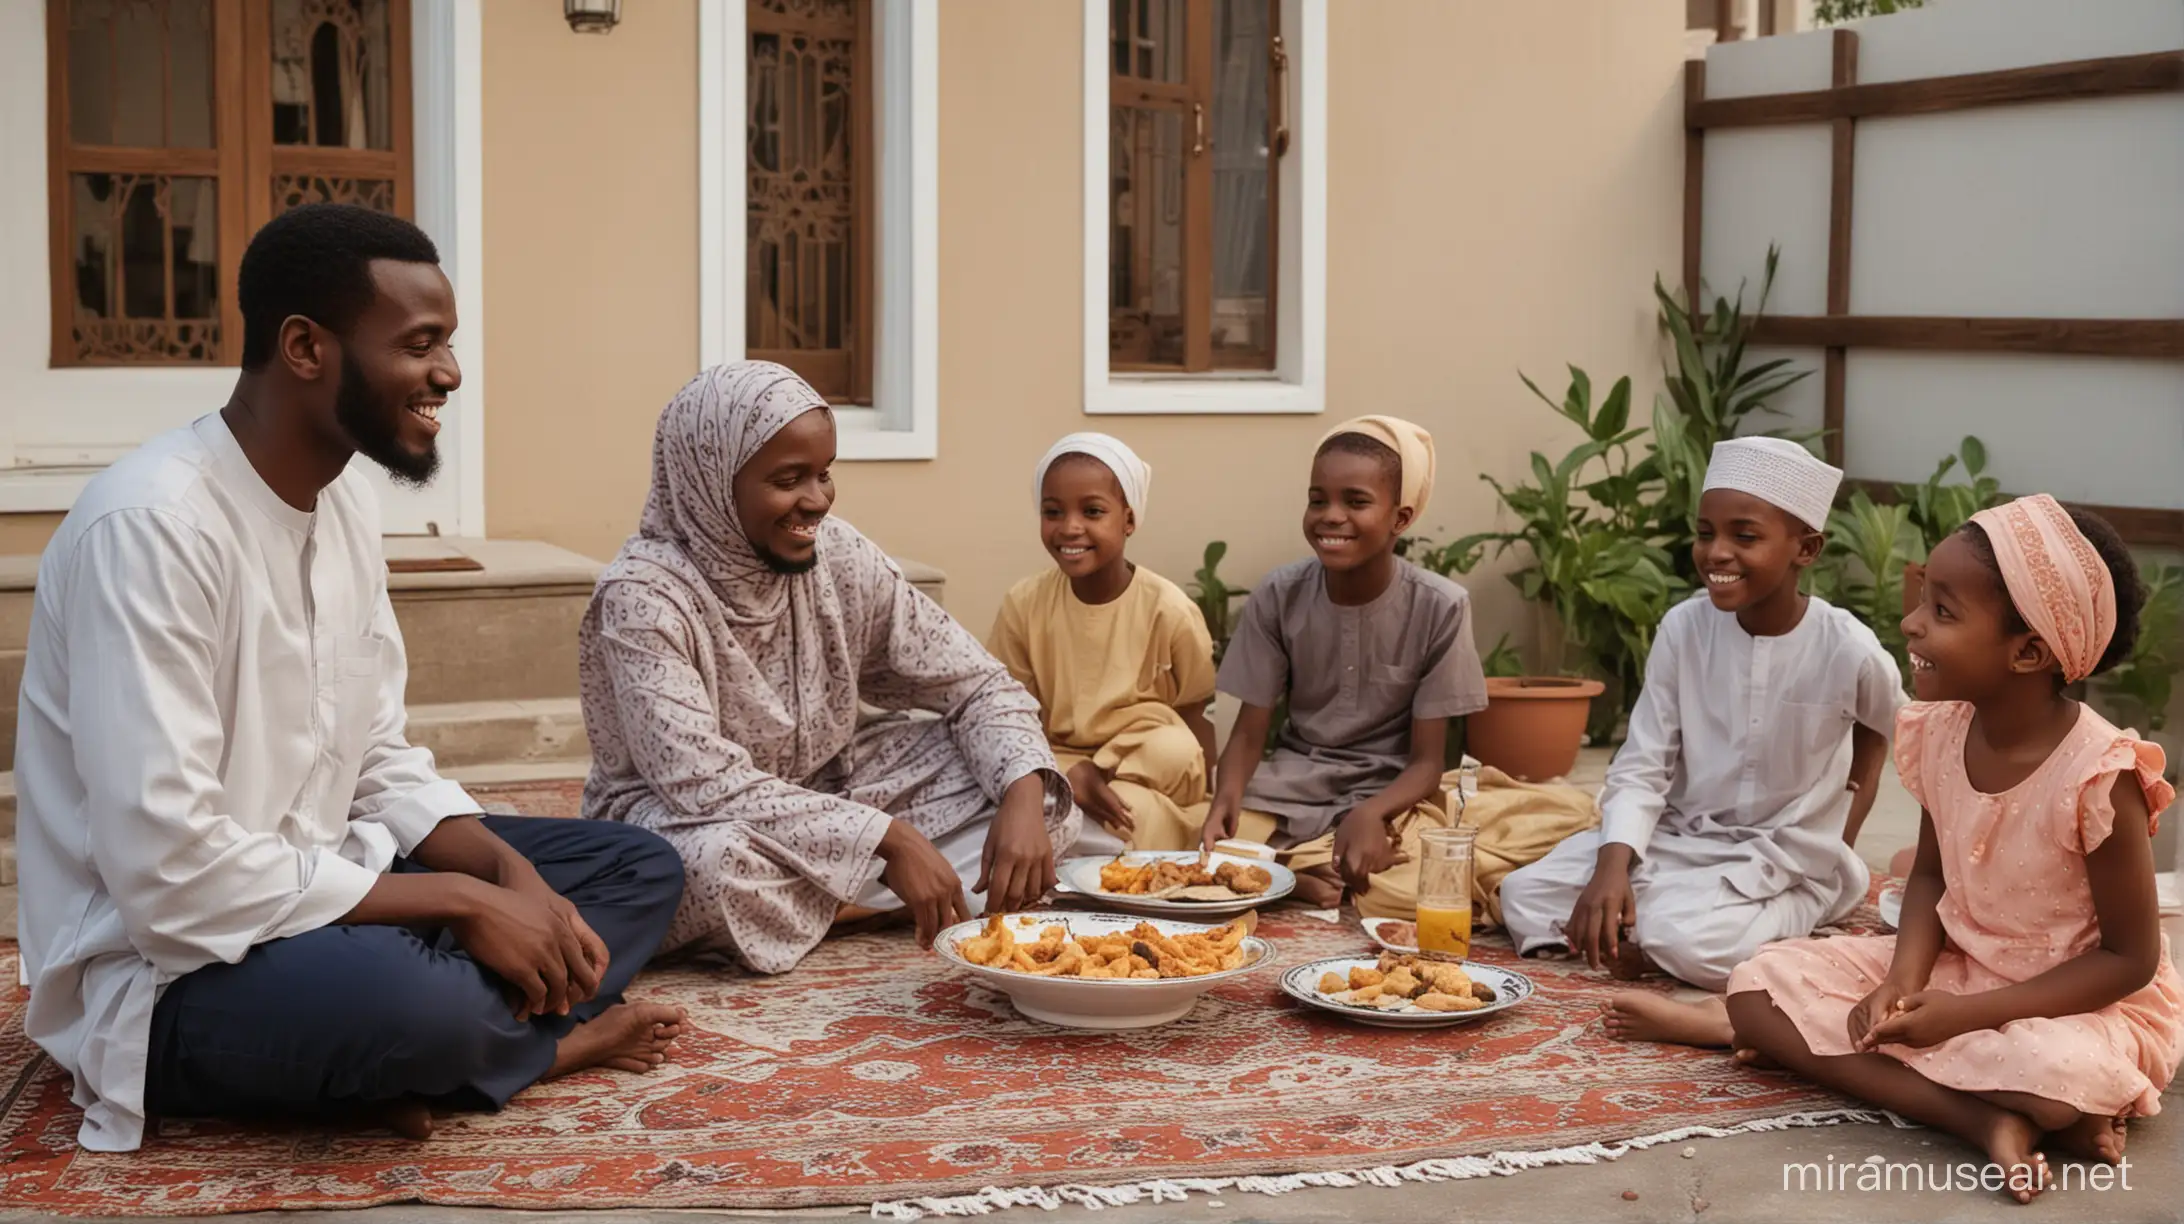 African muslim family celebrating Ramadan with kids and neigbours

